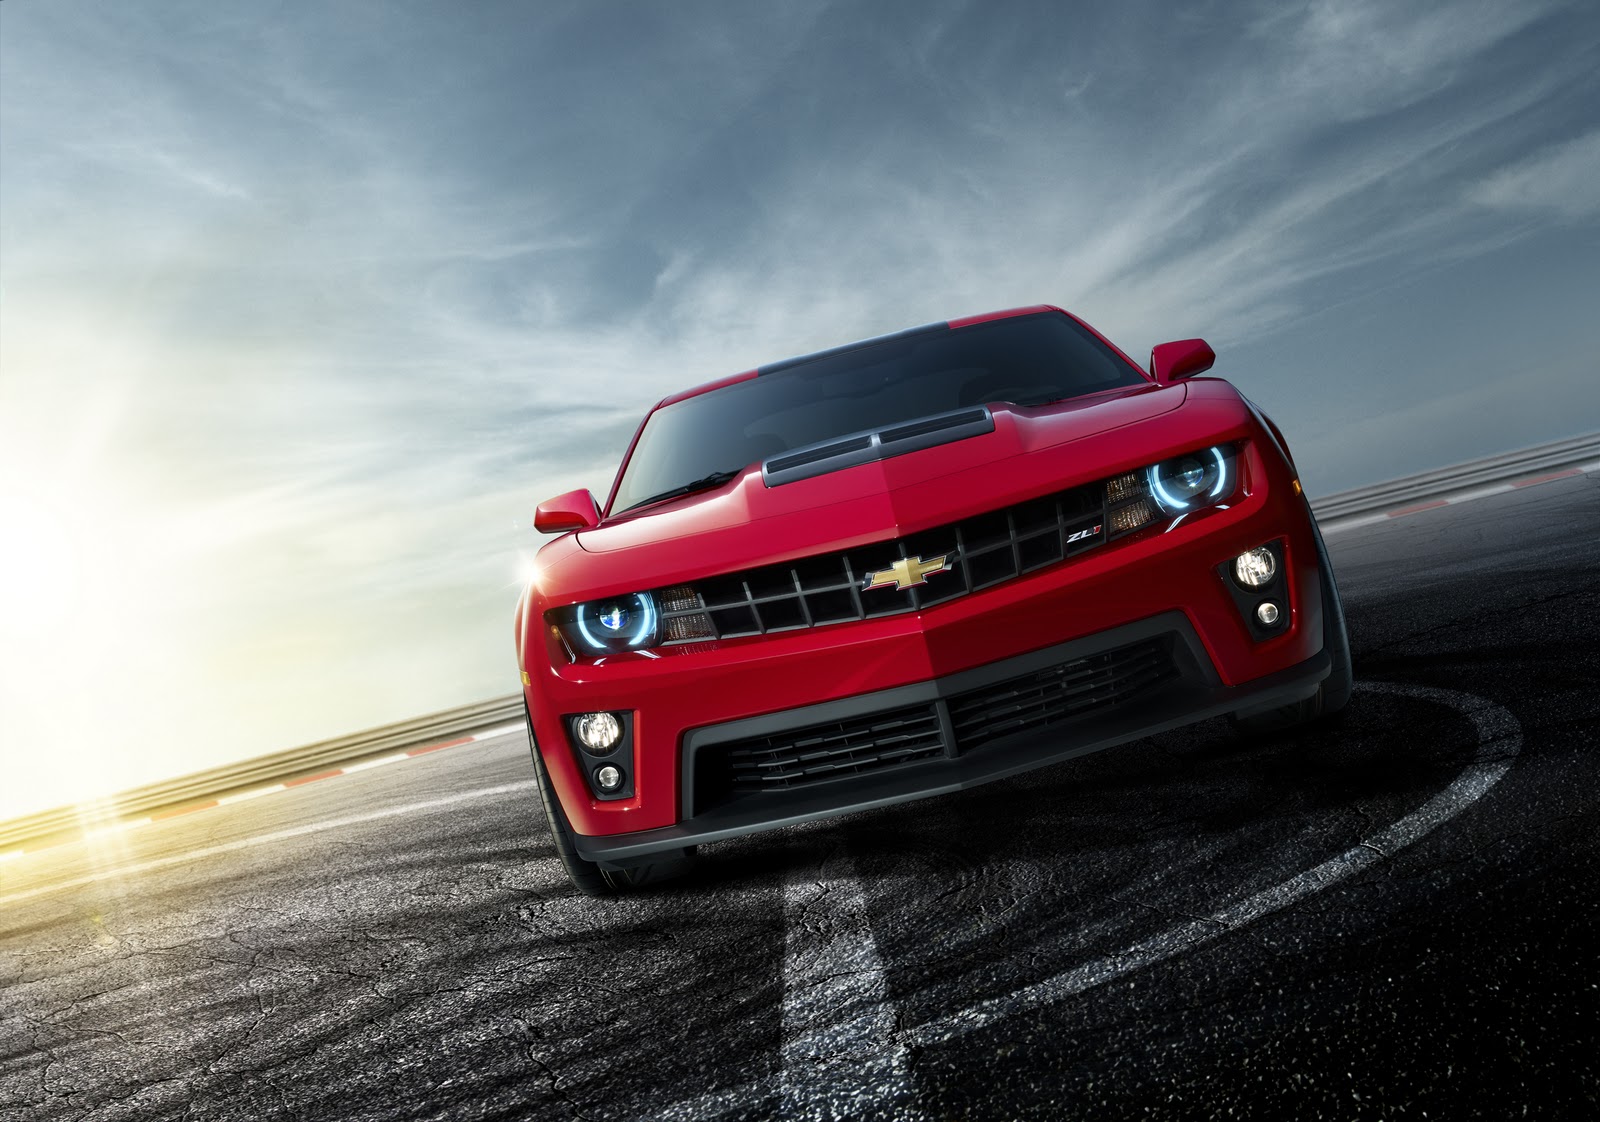 The ZL1 badge appears on the